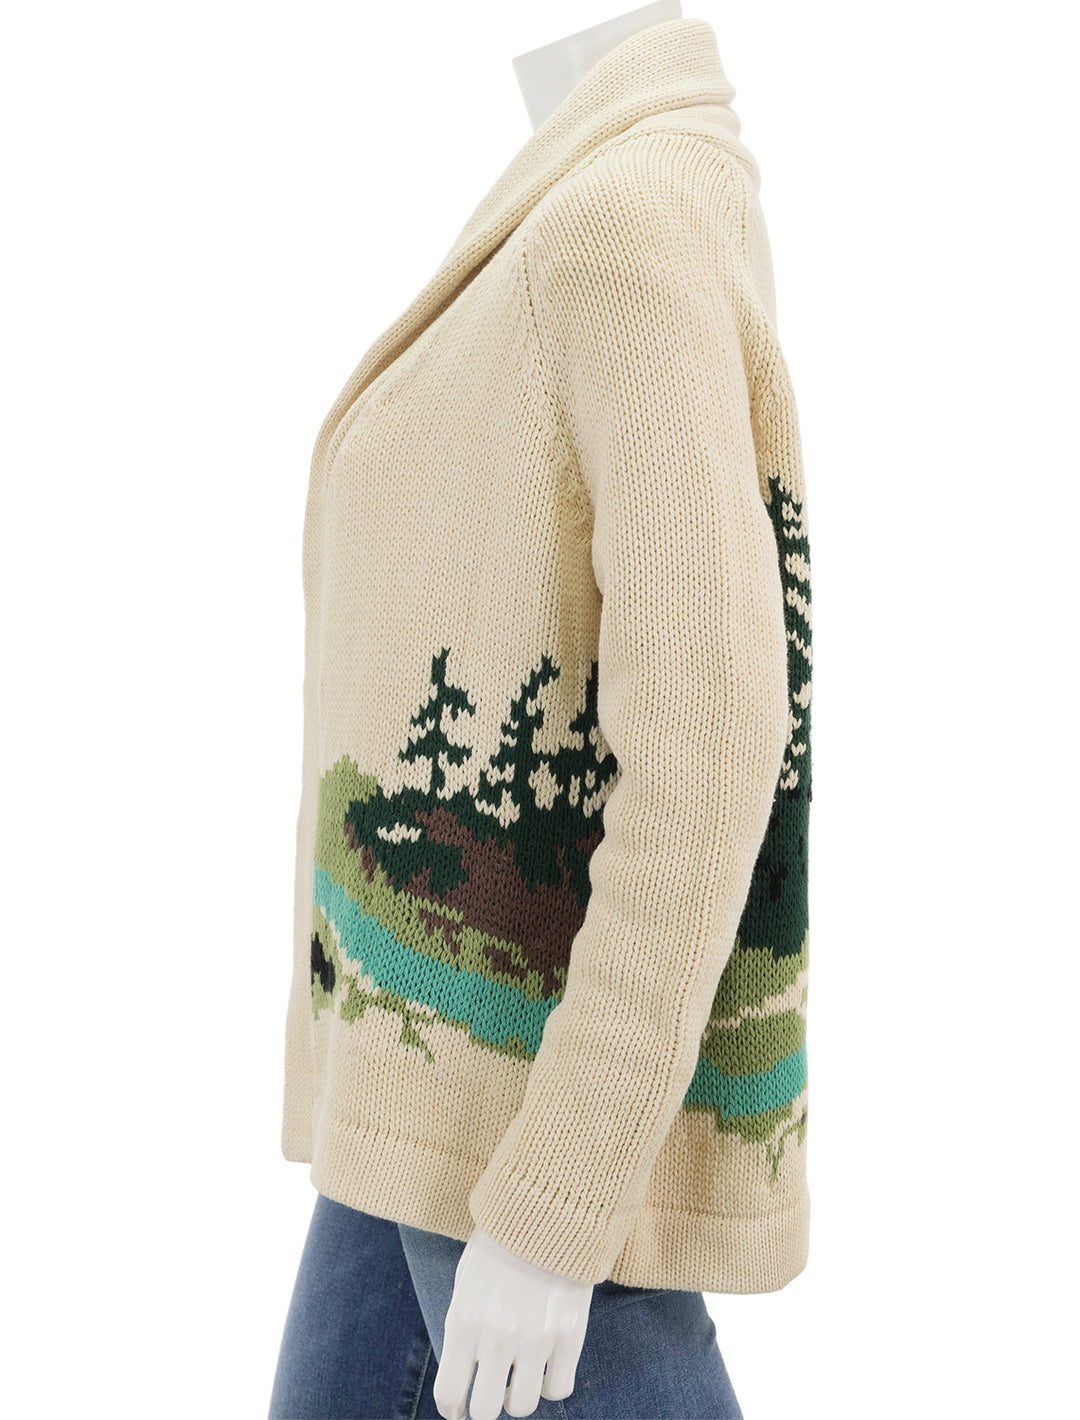 Side view of The Great's the camp lodge cardigan in cream.